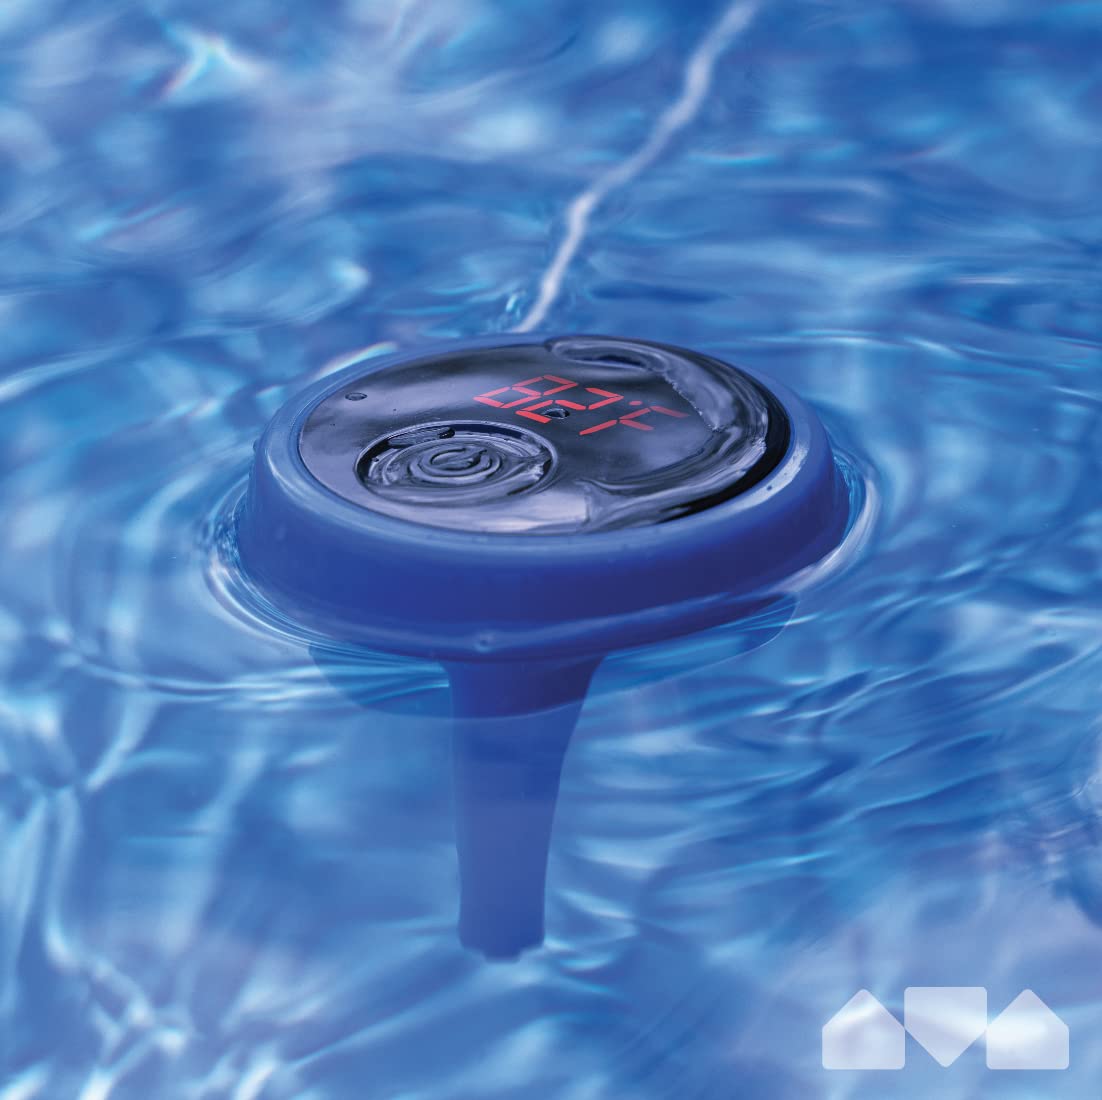 Milliard Digital Floating Pool Thermometer- Easy Read, for Swimming Pool or Spa